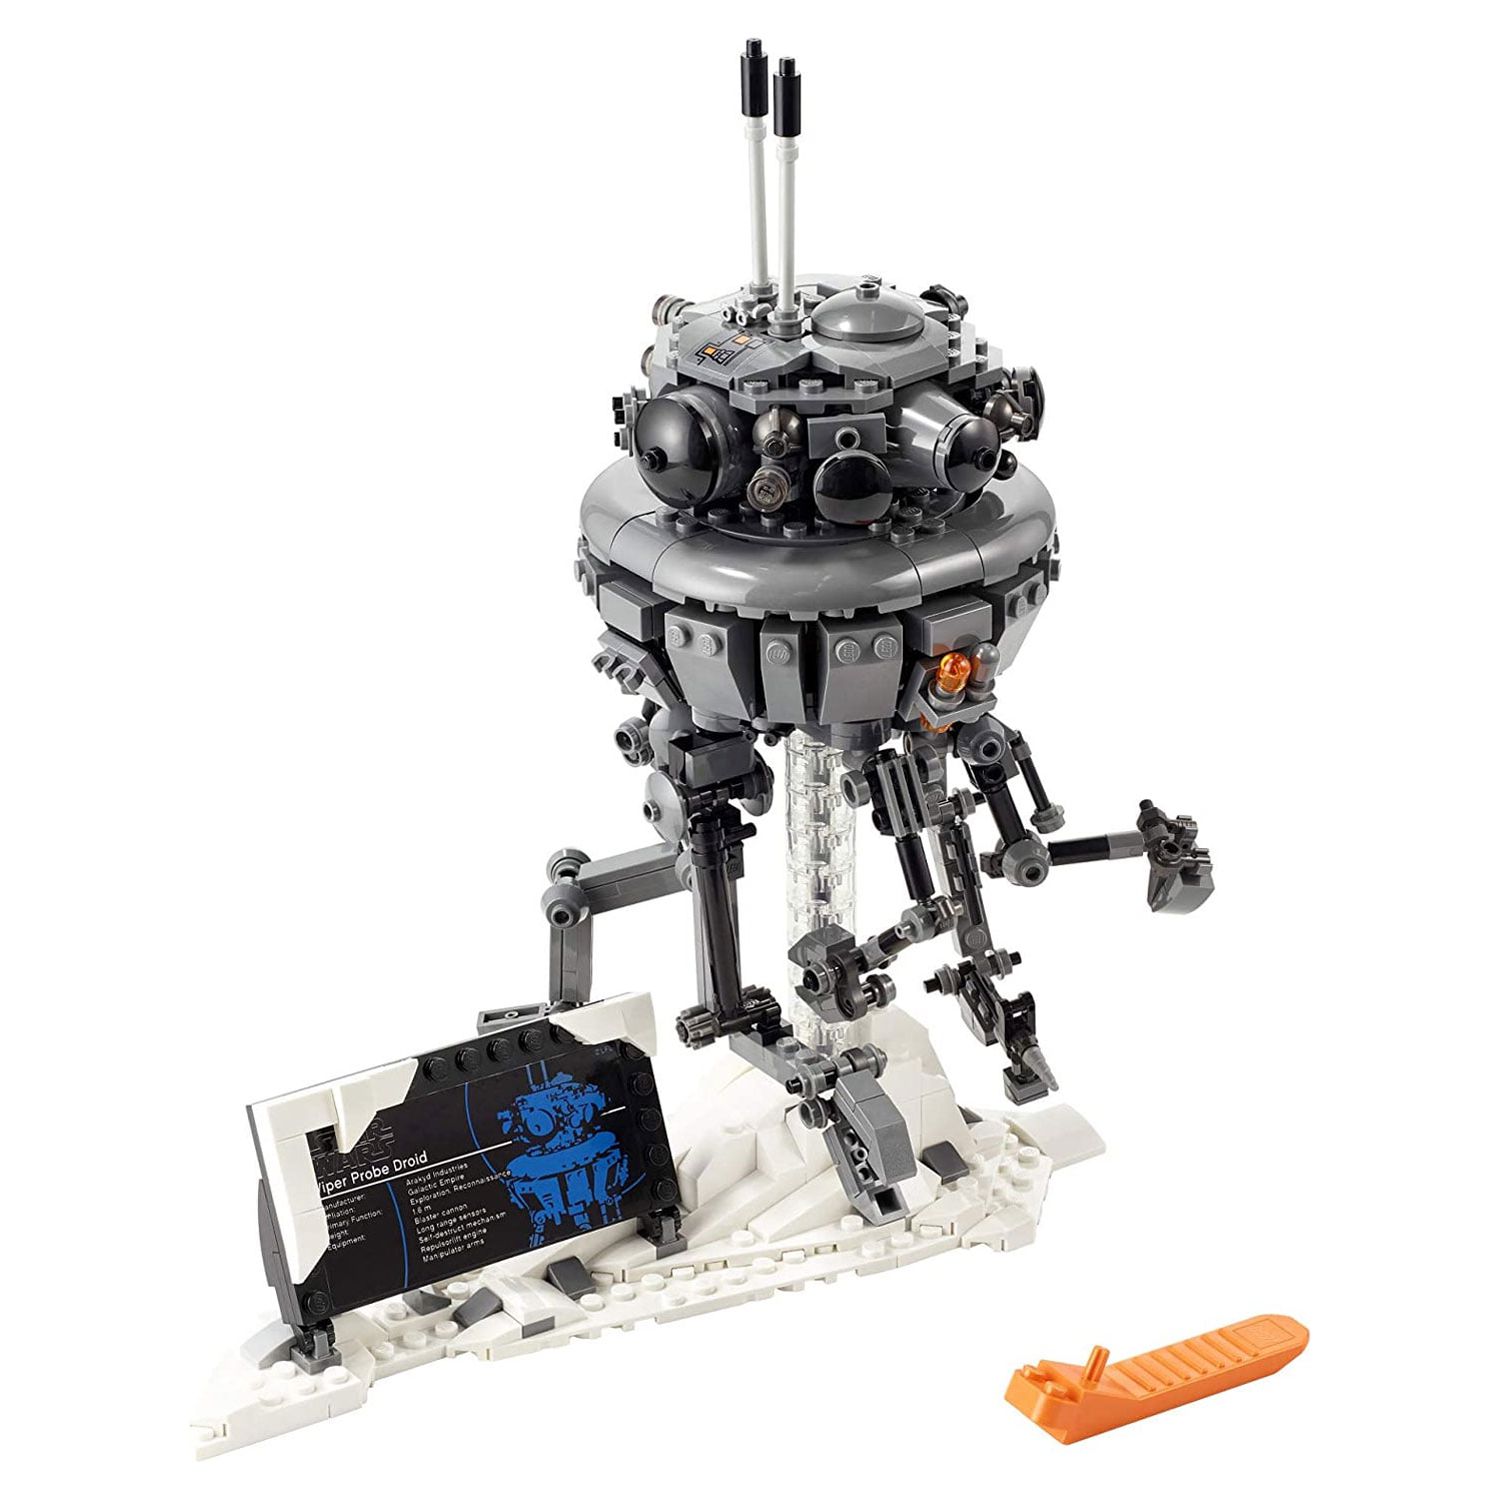 LEGO Star Wars Imperial Probe Droid 75306 Collectible Building Toy (683 Pieces) - image 3 of 8